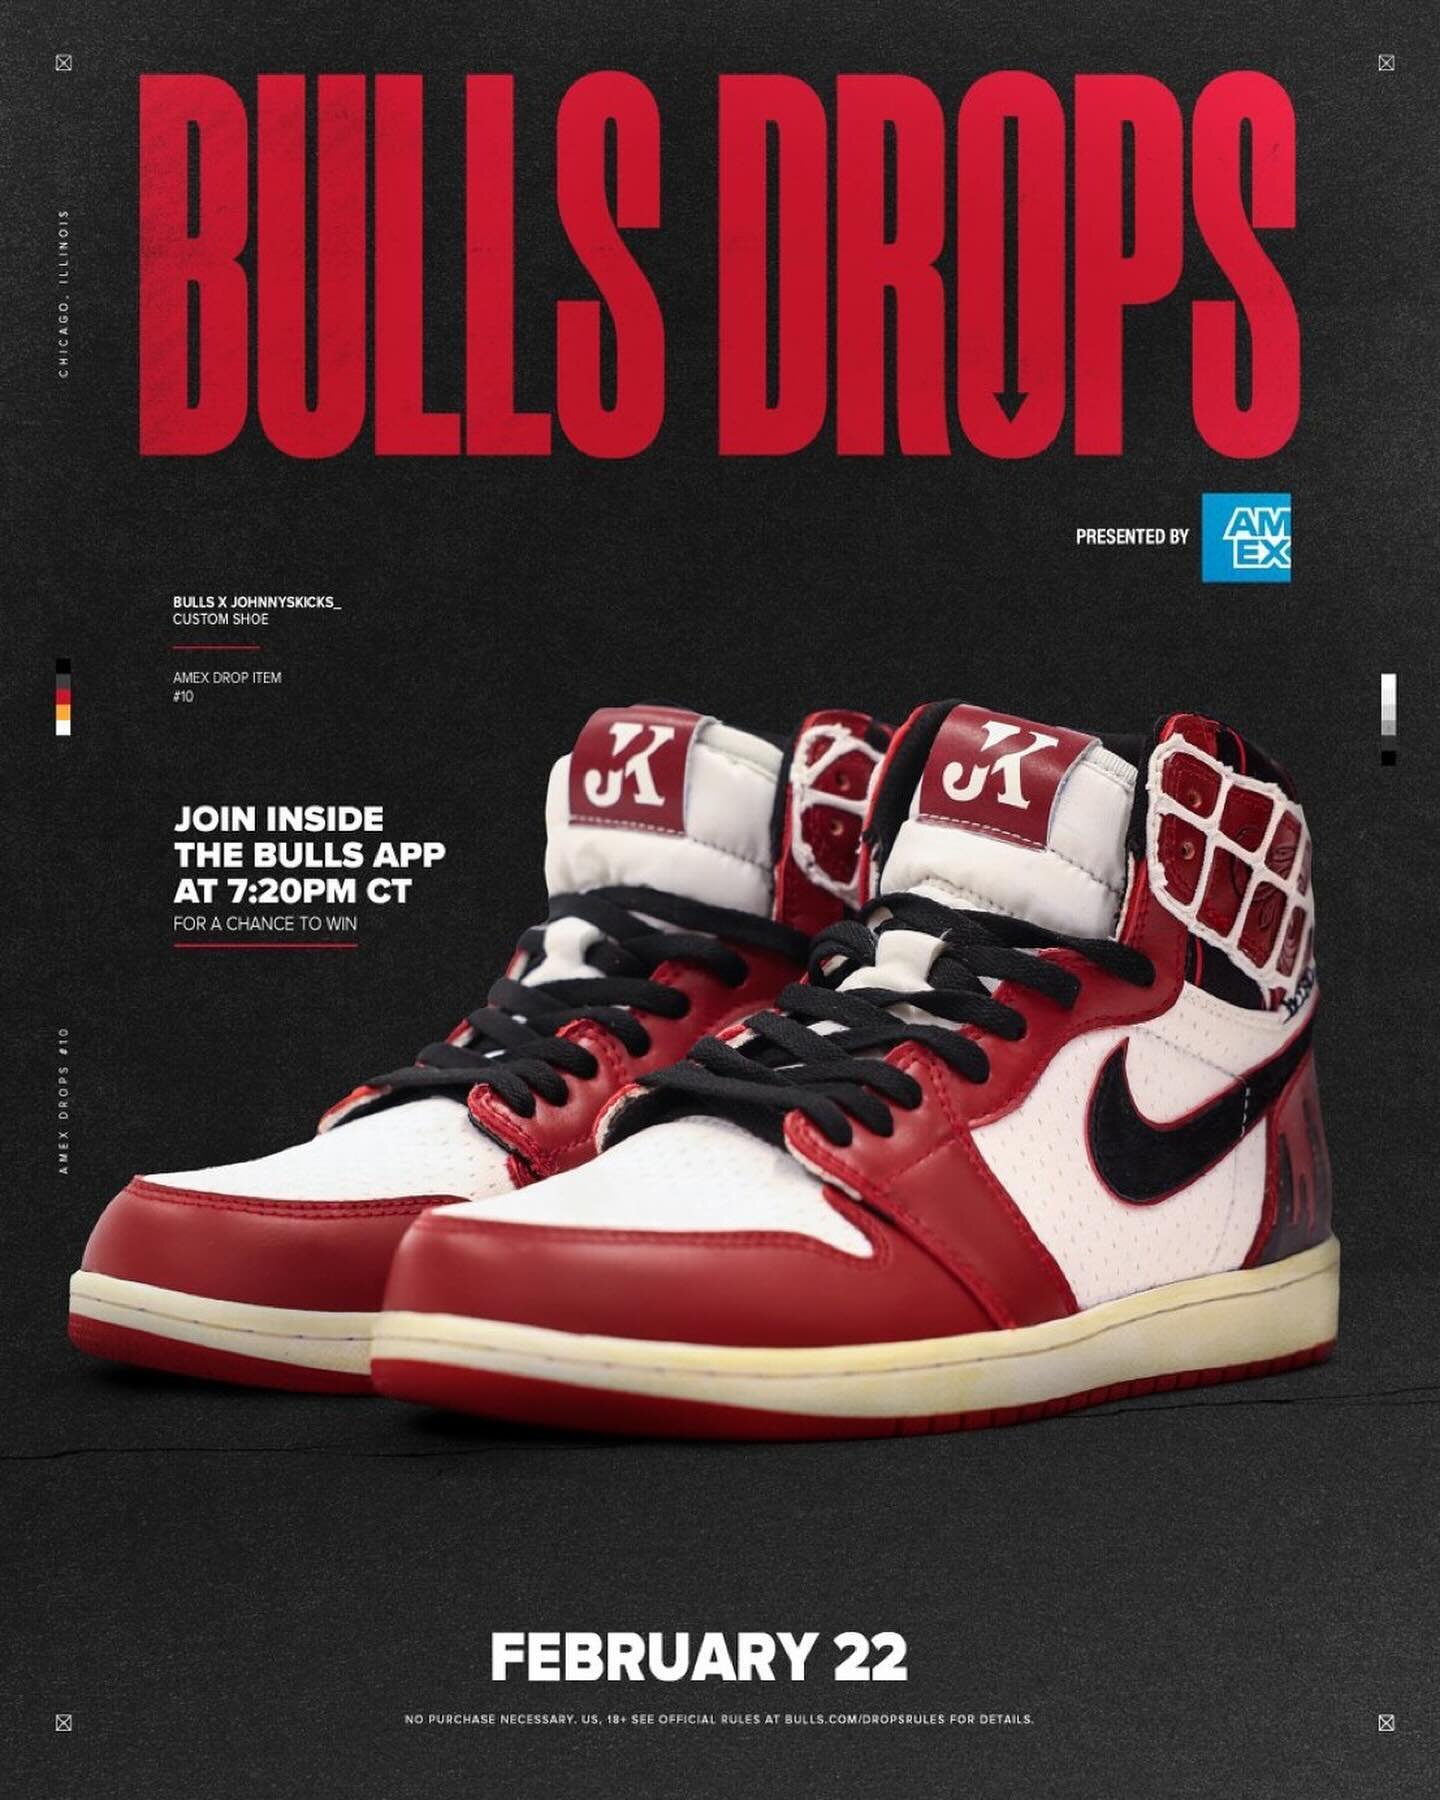 The Chicago Bulls and American Express have had incredible success partnering on a series of exclusive drops giving fans who log in to the Bulls mobile app an opportunity to wear custom designed shoes, gear, giveaways and more at the intersection of 